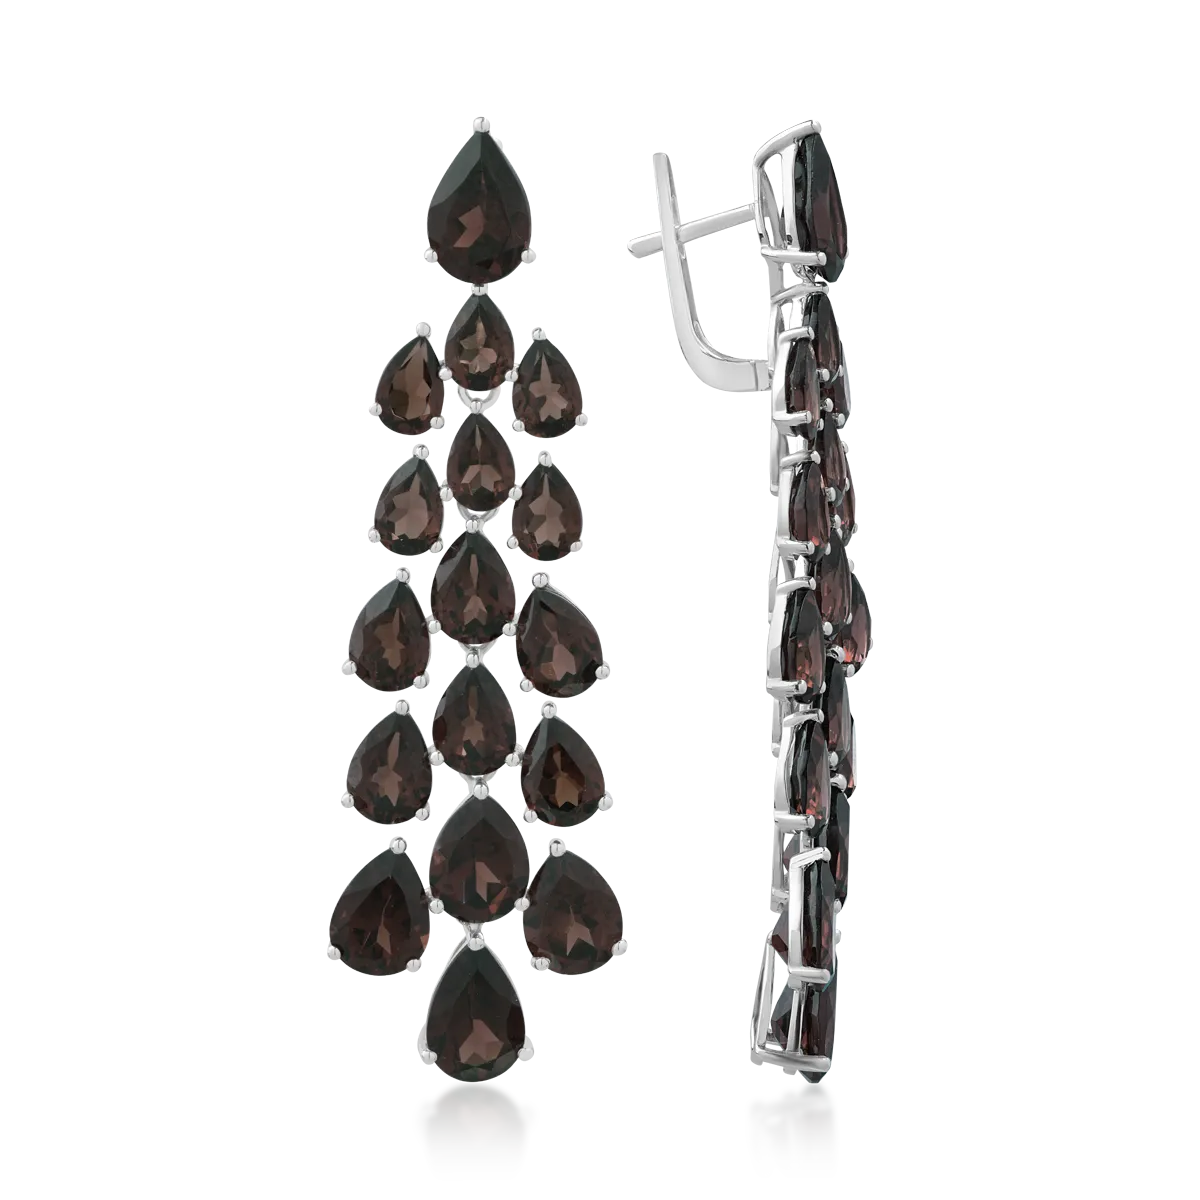 14K white gold earrings with 24.04ct smoky quartz